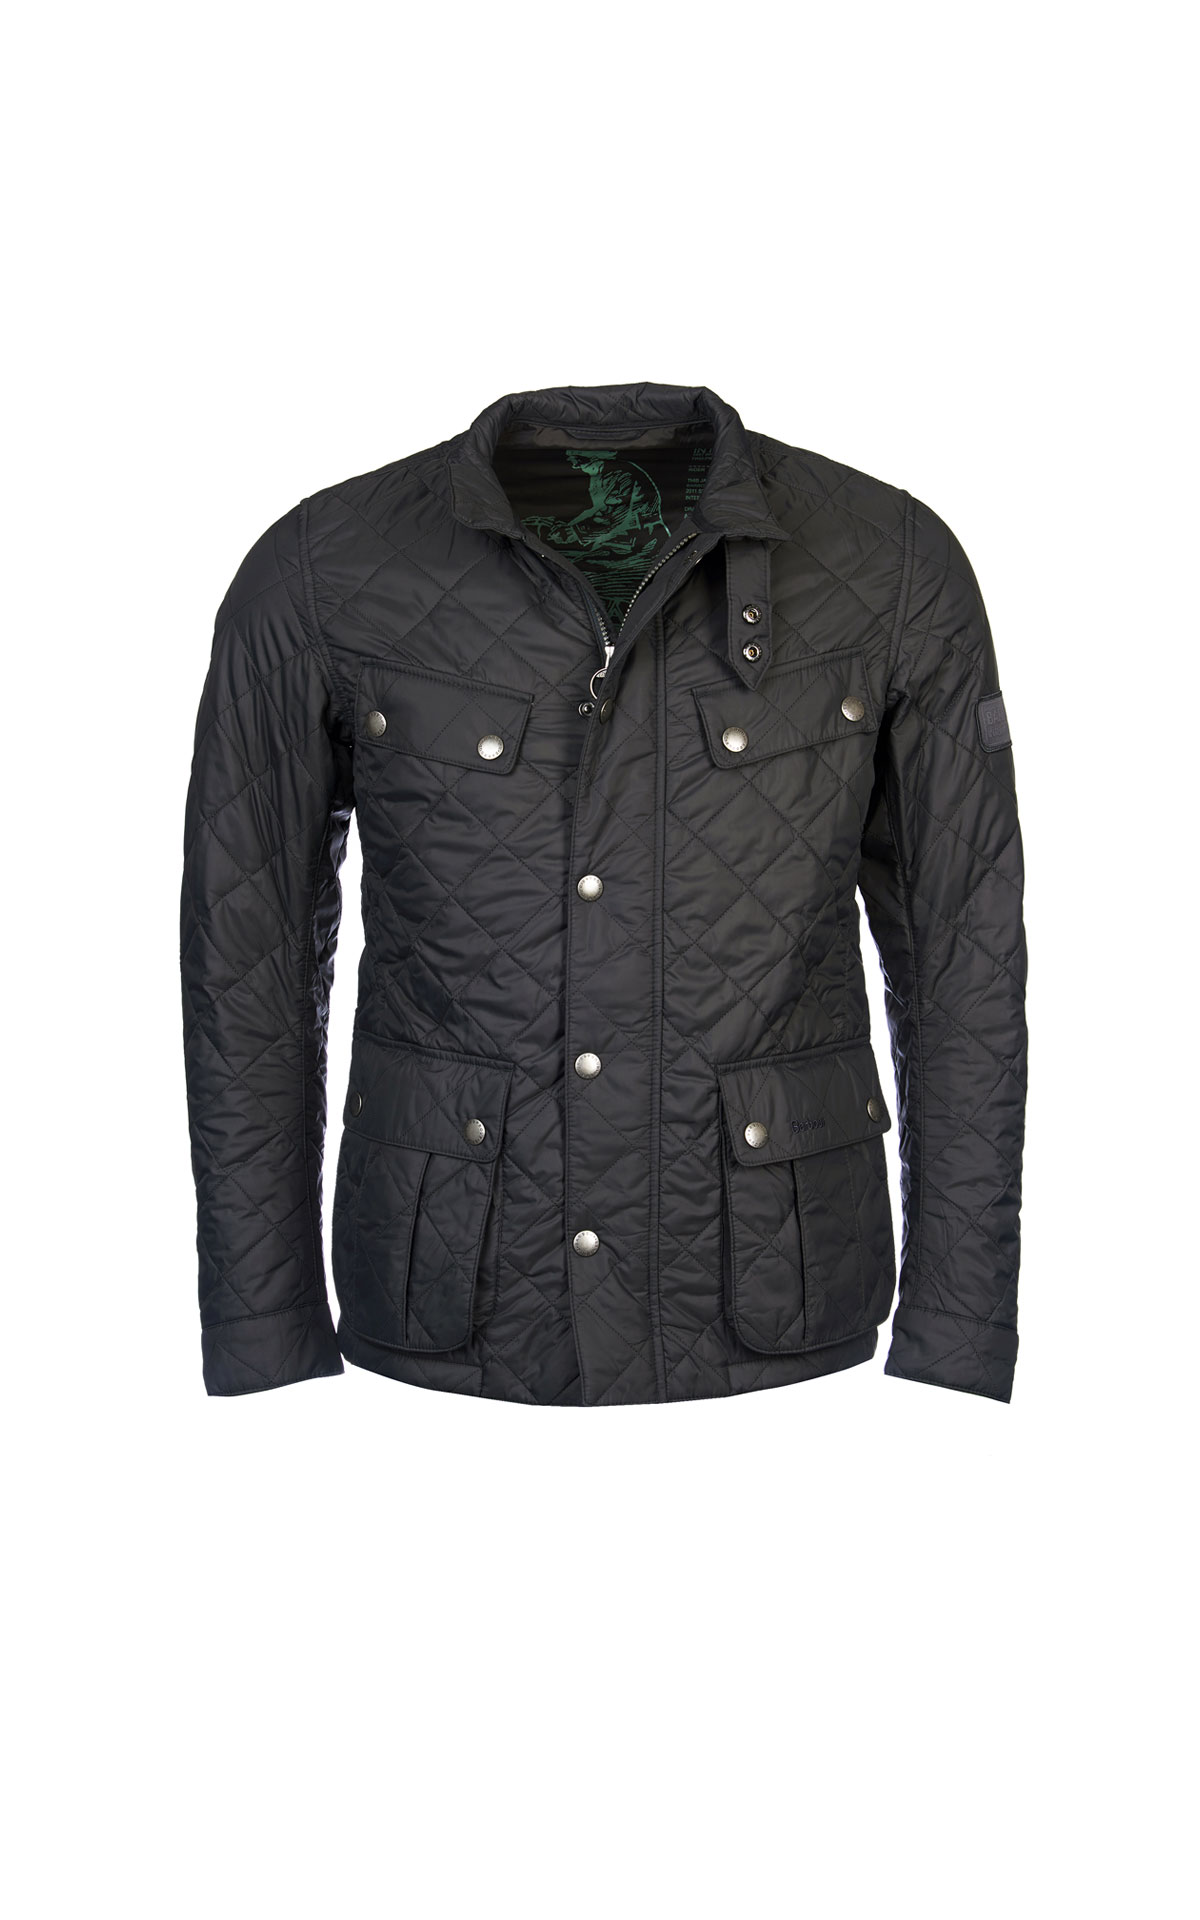 Sale Now On At Barbour Outlet Store Near London | Bicester Village